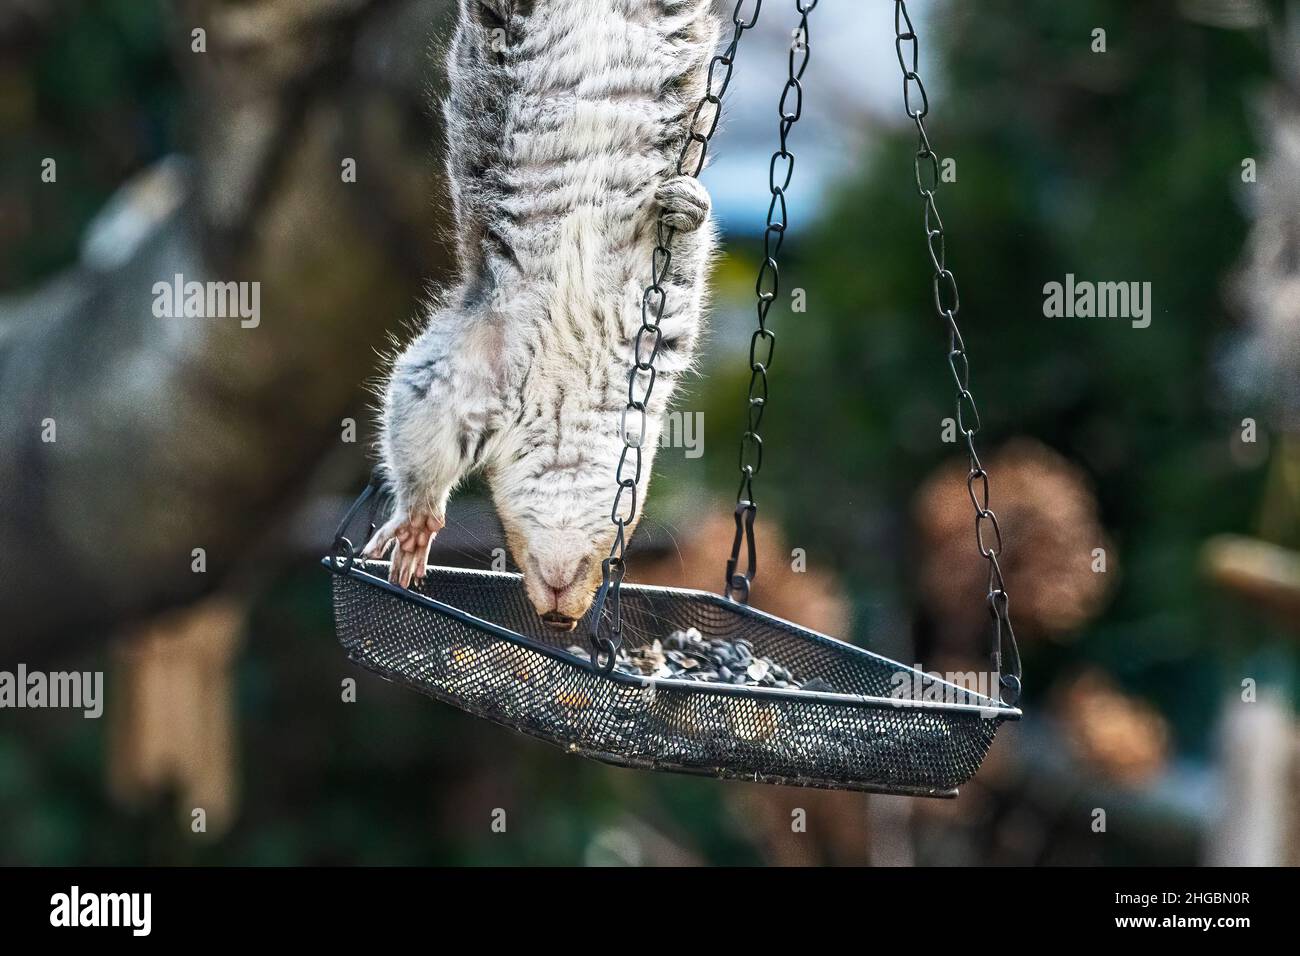 Clever gray squirrel finds way to raid bird feeder Stock Photo